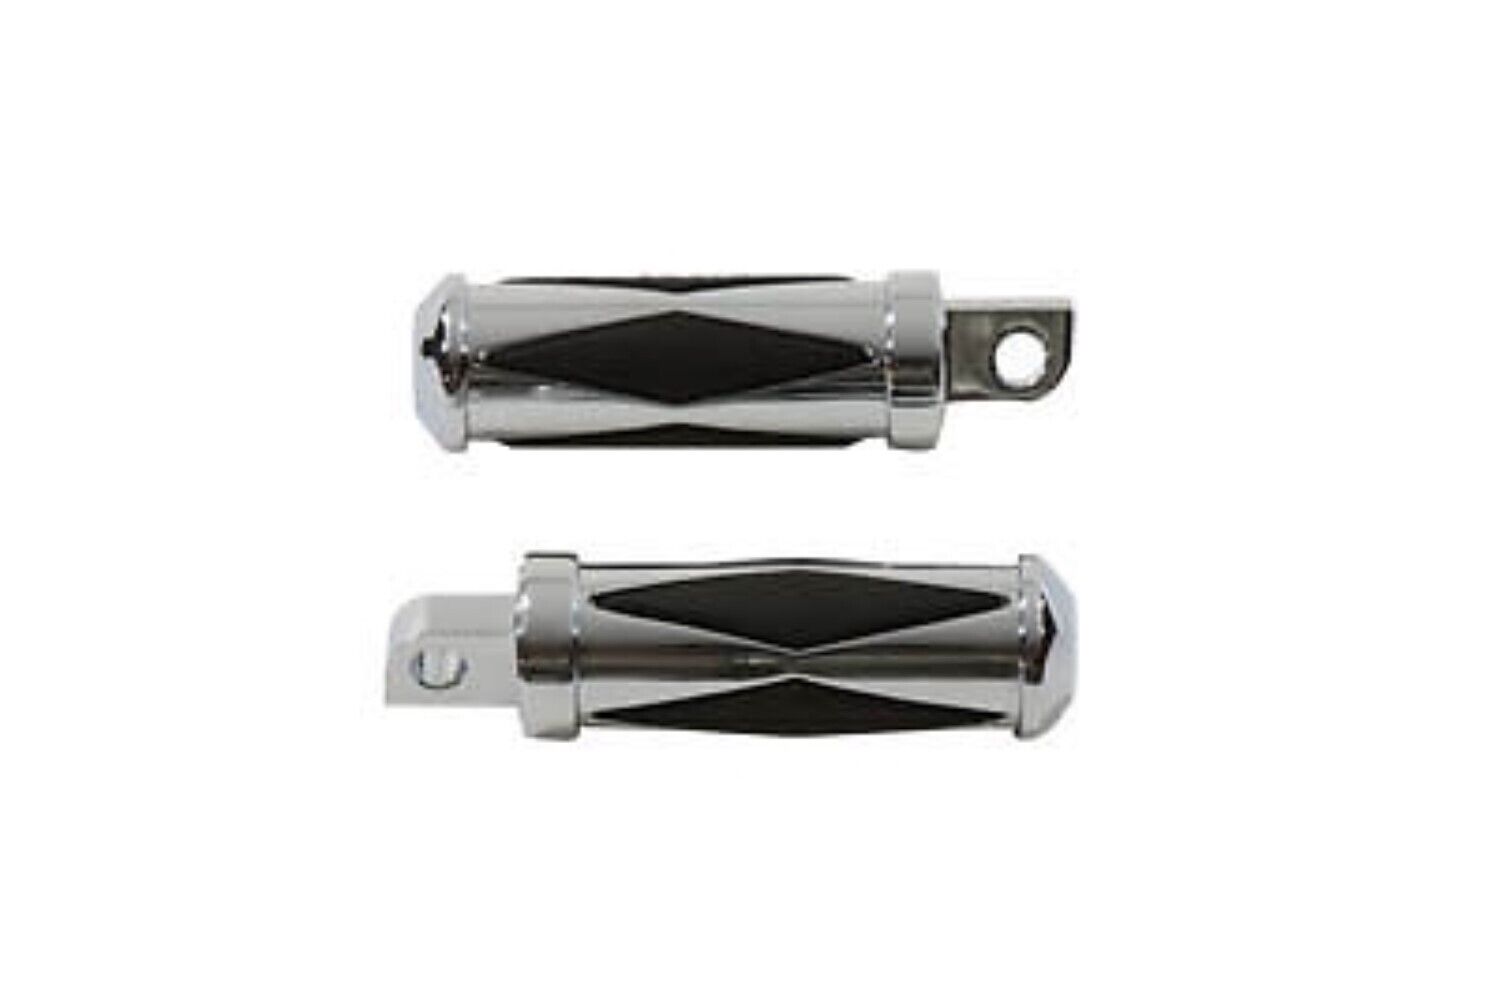 Chrome Diamond Male Mount Passenger Foot Pegs for Harley Softail Dyna Sportster